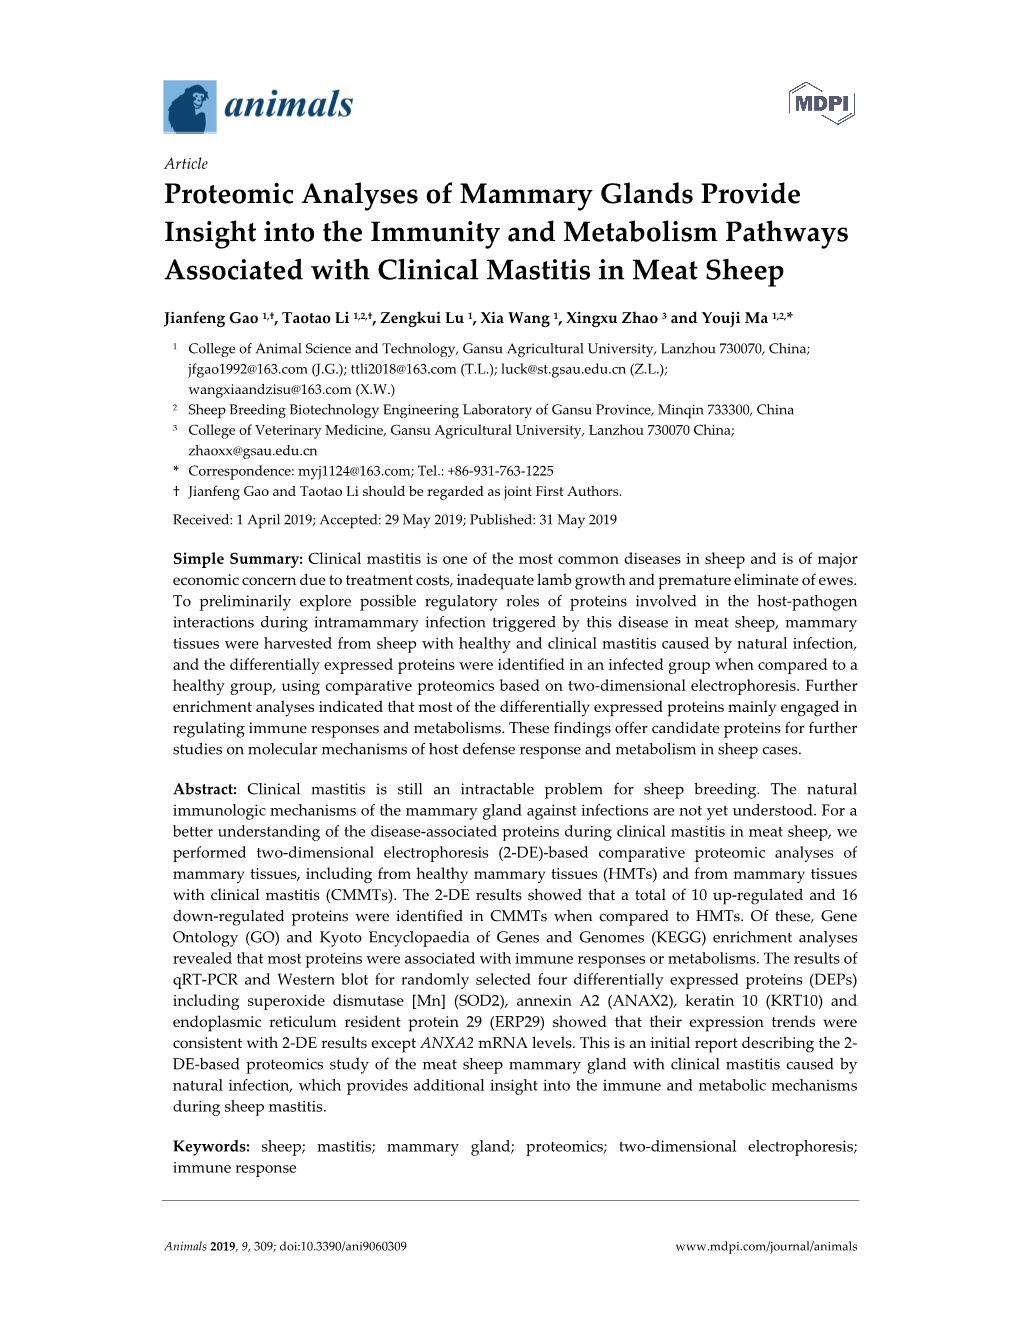 Proteomic Analyses of Mammary Glands Provide Insight Into the Immunity and Metabolism Pathways Associated with Clinical Mastitis in Meat Sheep